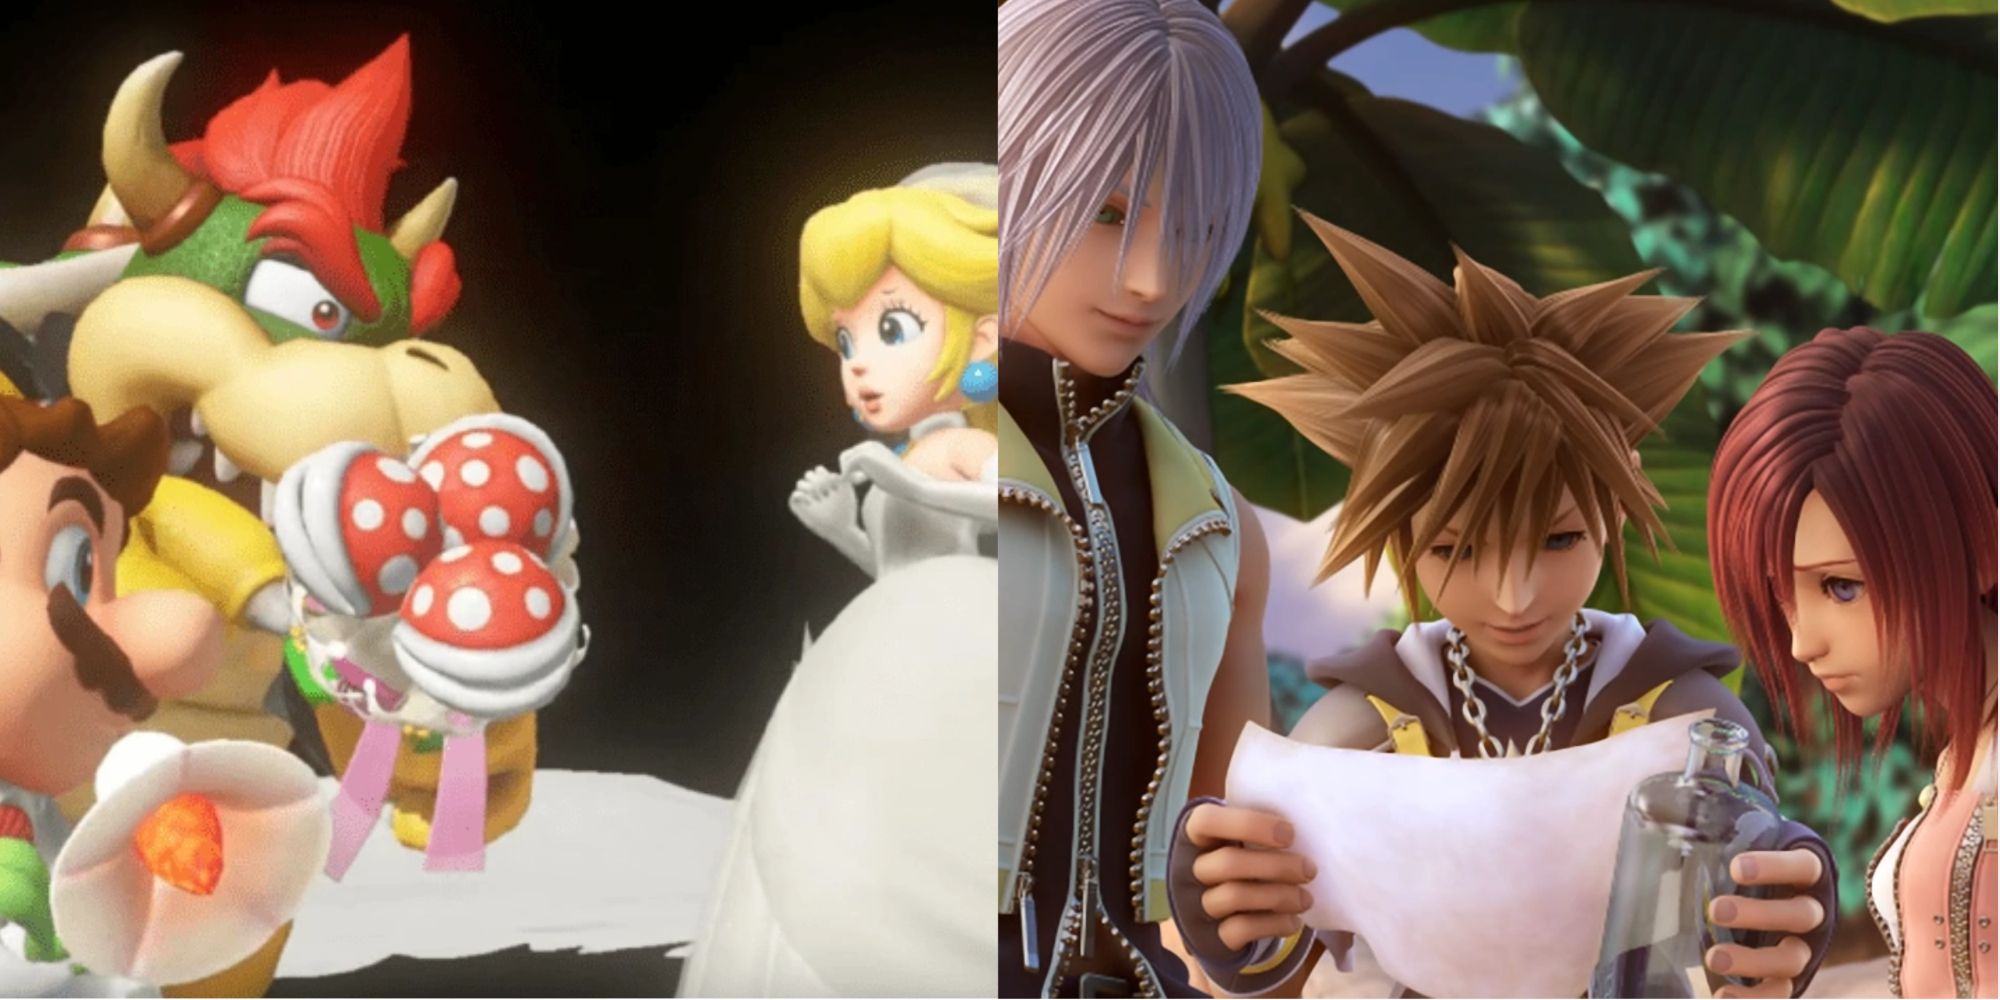 Split image of characters from Mario and Kingdom Hearts